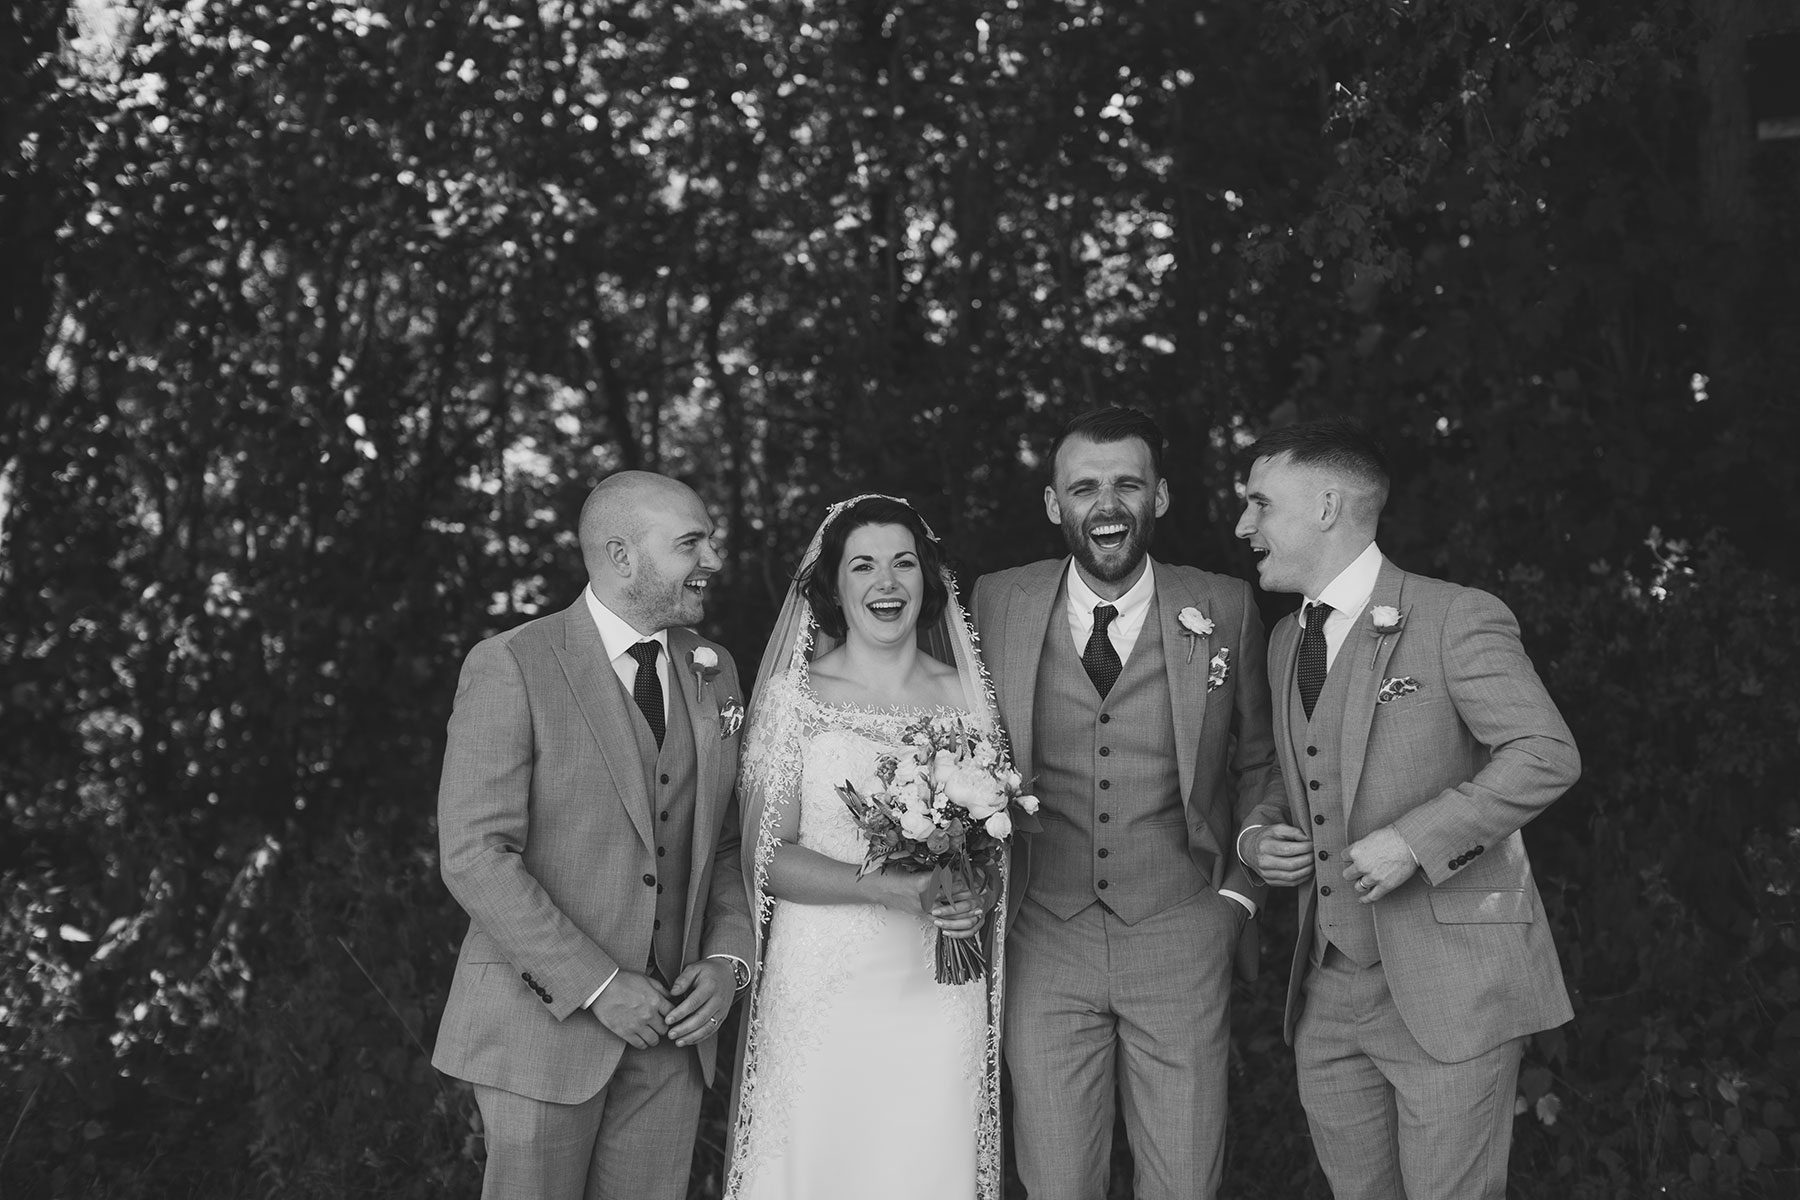 With the men - Reportage Wedding at Upcote Barn | Bullit